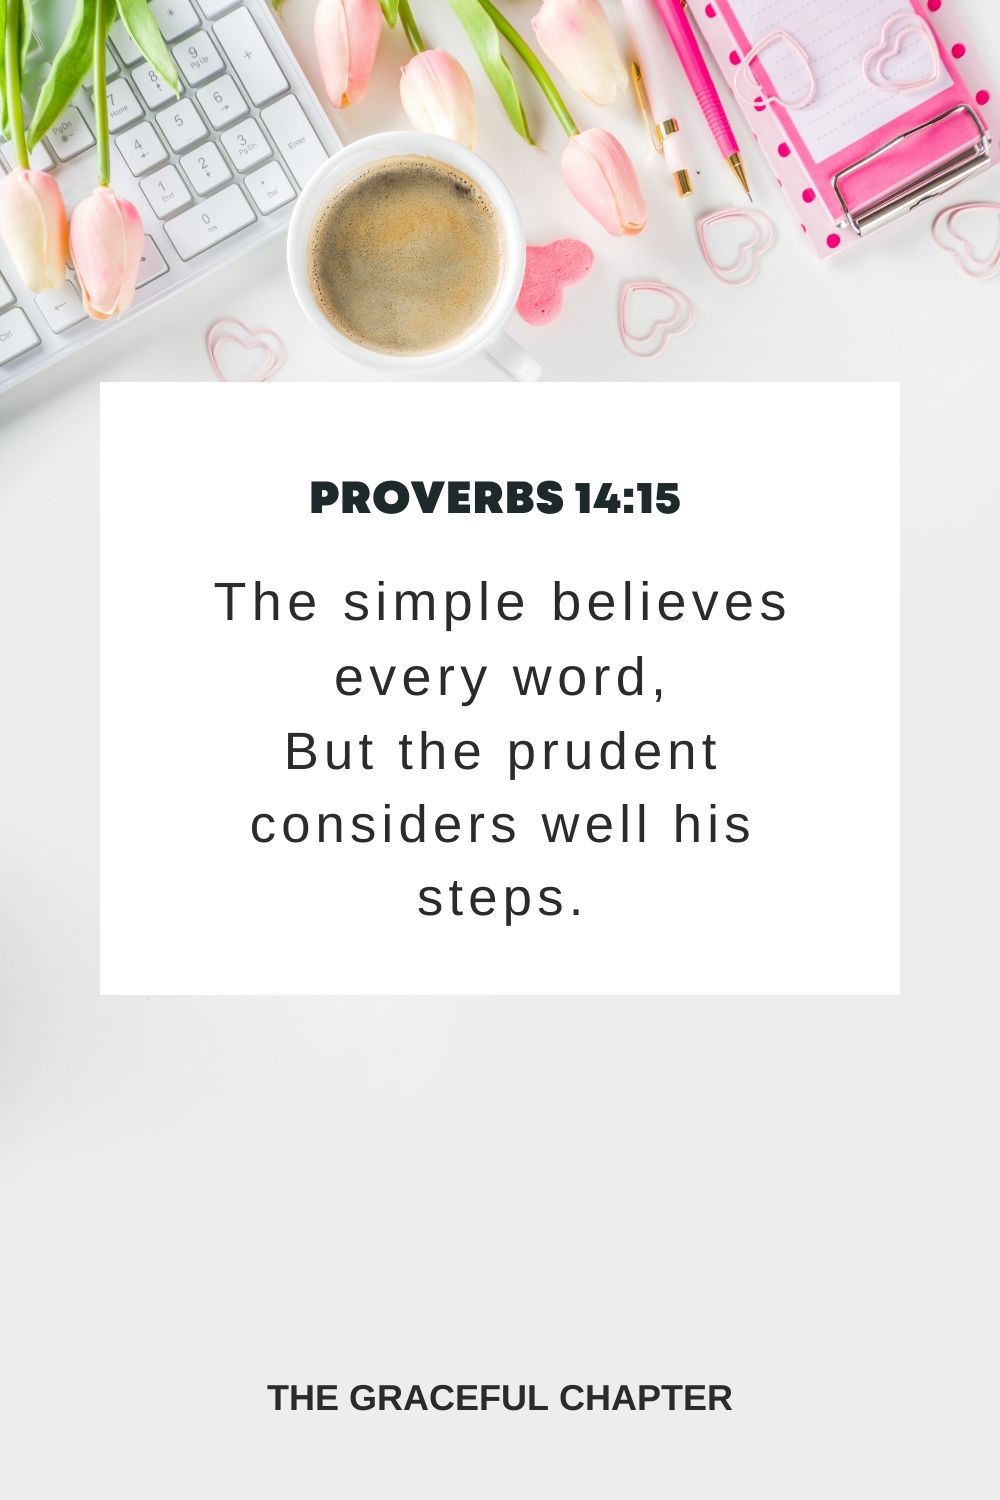 The simple believes every word, But the prudent considers well his steps. Proverbs 14:15